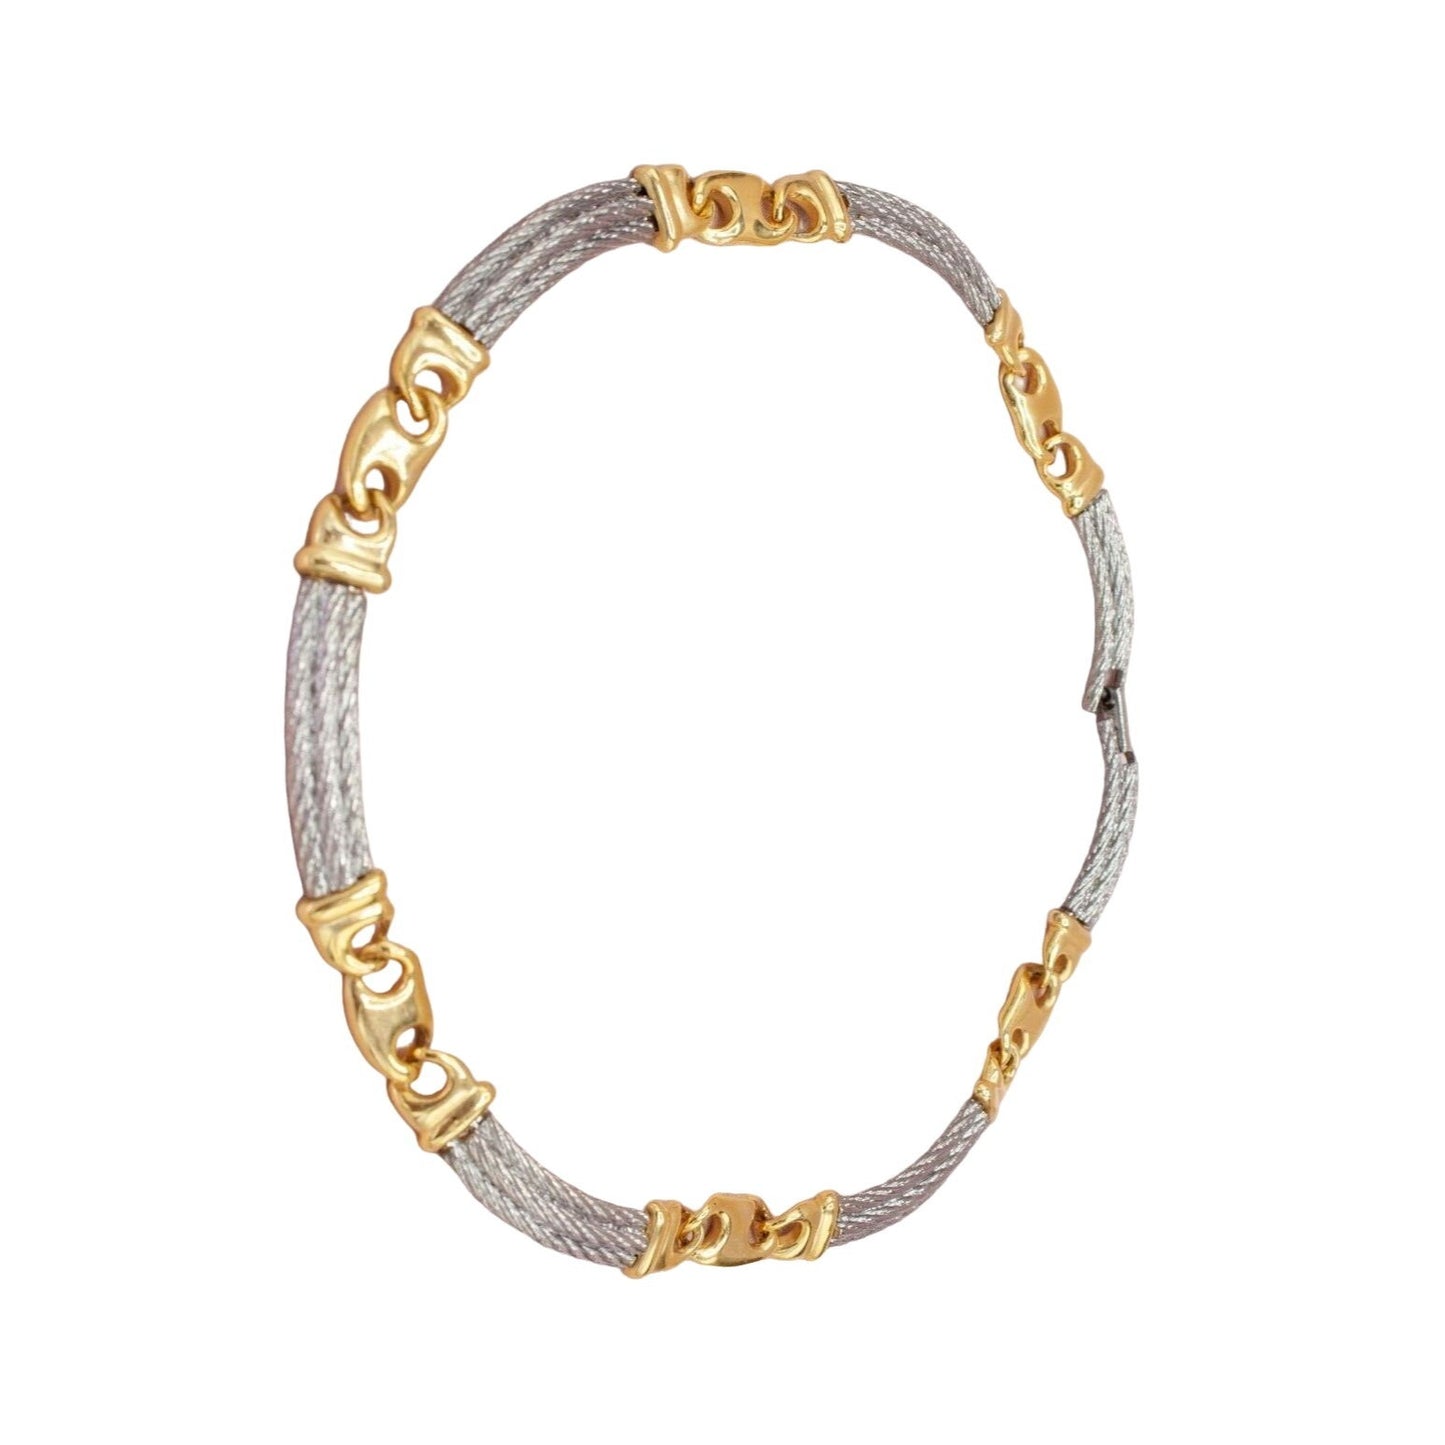 Paolo Gucci, 17" long , two-tone necklace made from interlocking, polished, gold, 'Gucci' mariner and brushed silver rope links